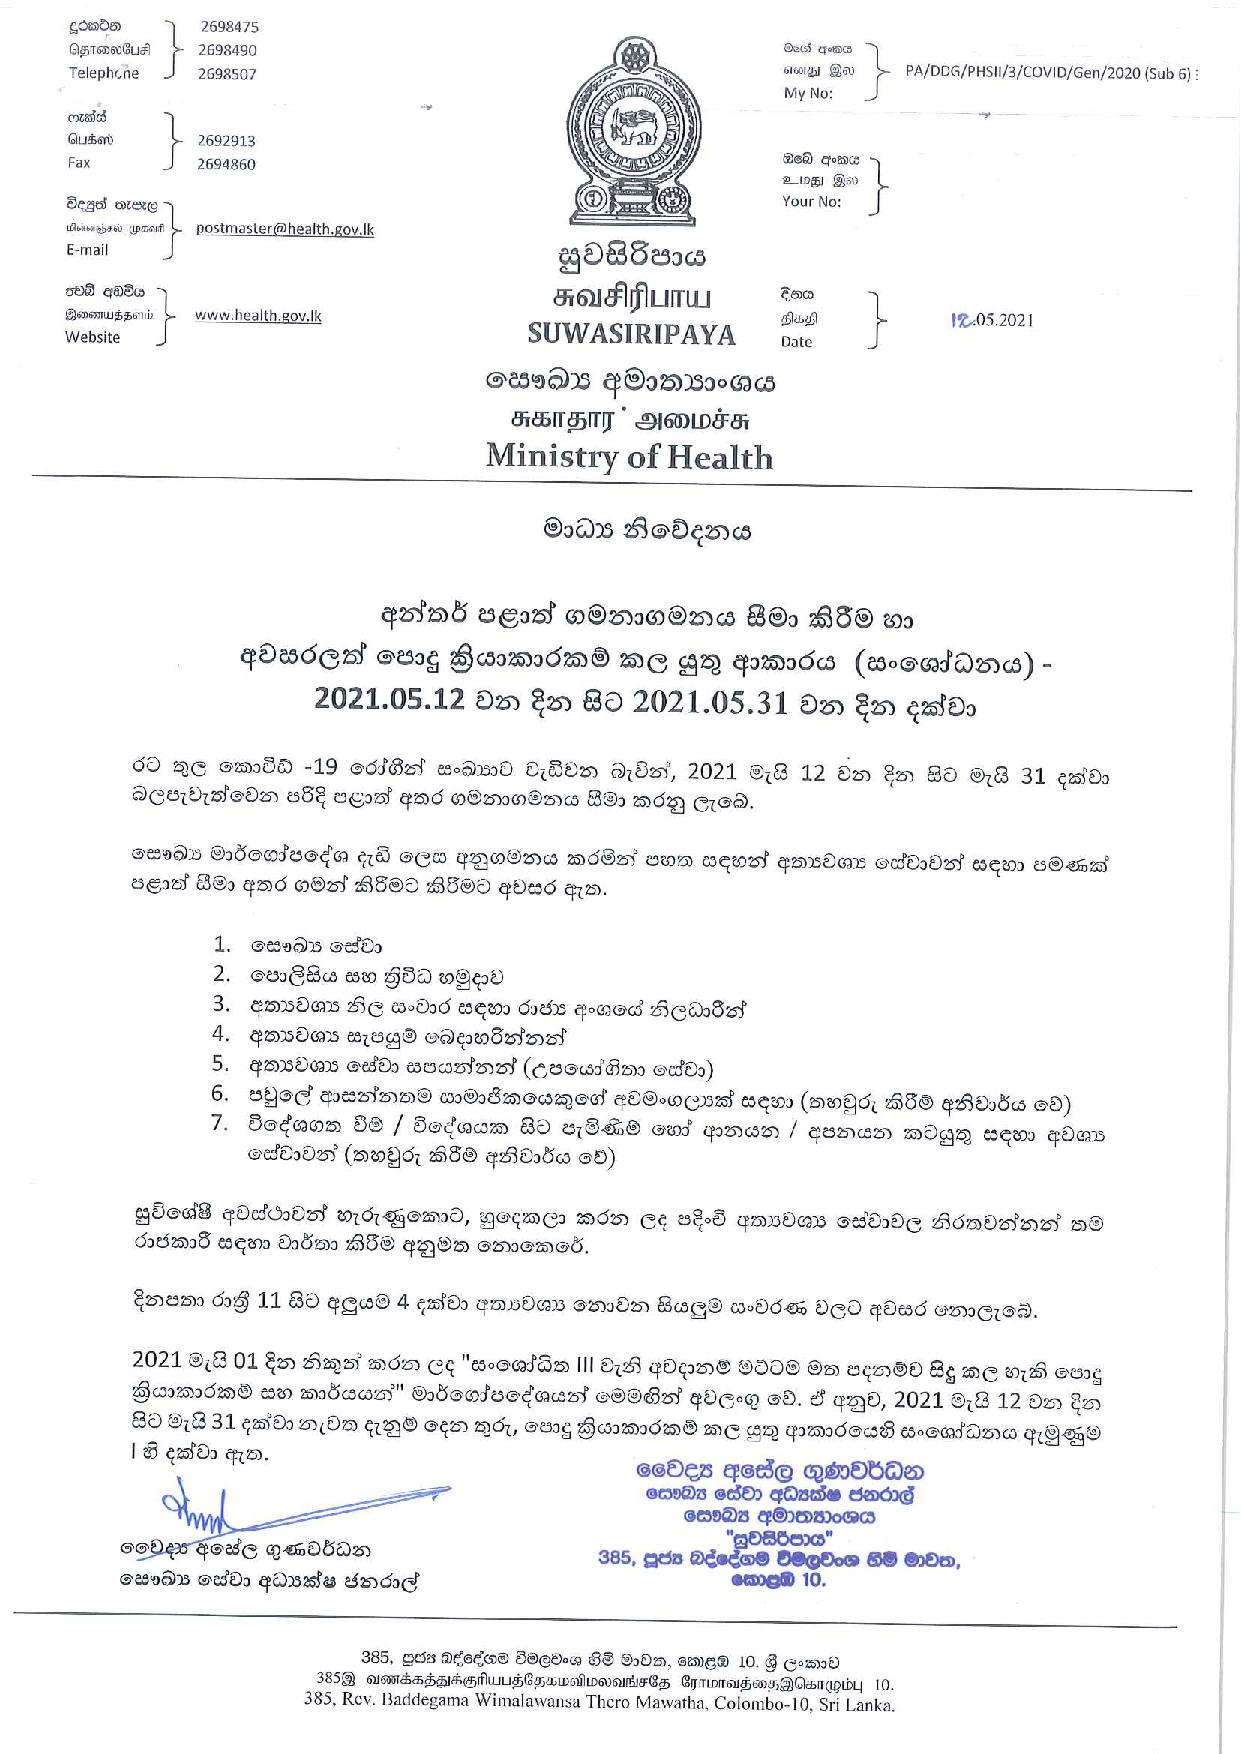 Restriction of inter provincial travel and Revised restrictions on permitted functions with effect from 12.05.2021 until 31.05.2021 EnglishSinhala 1 page 005